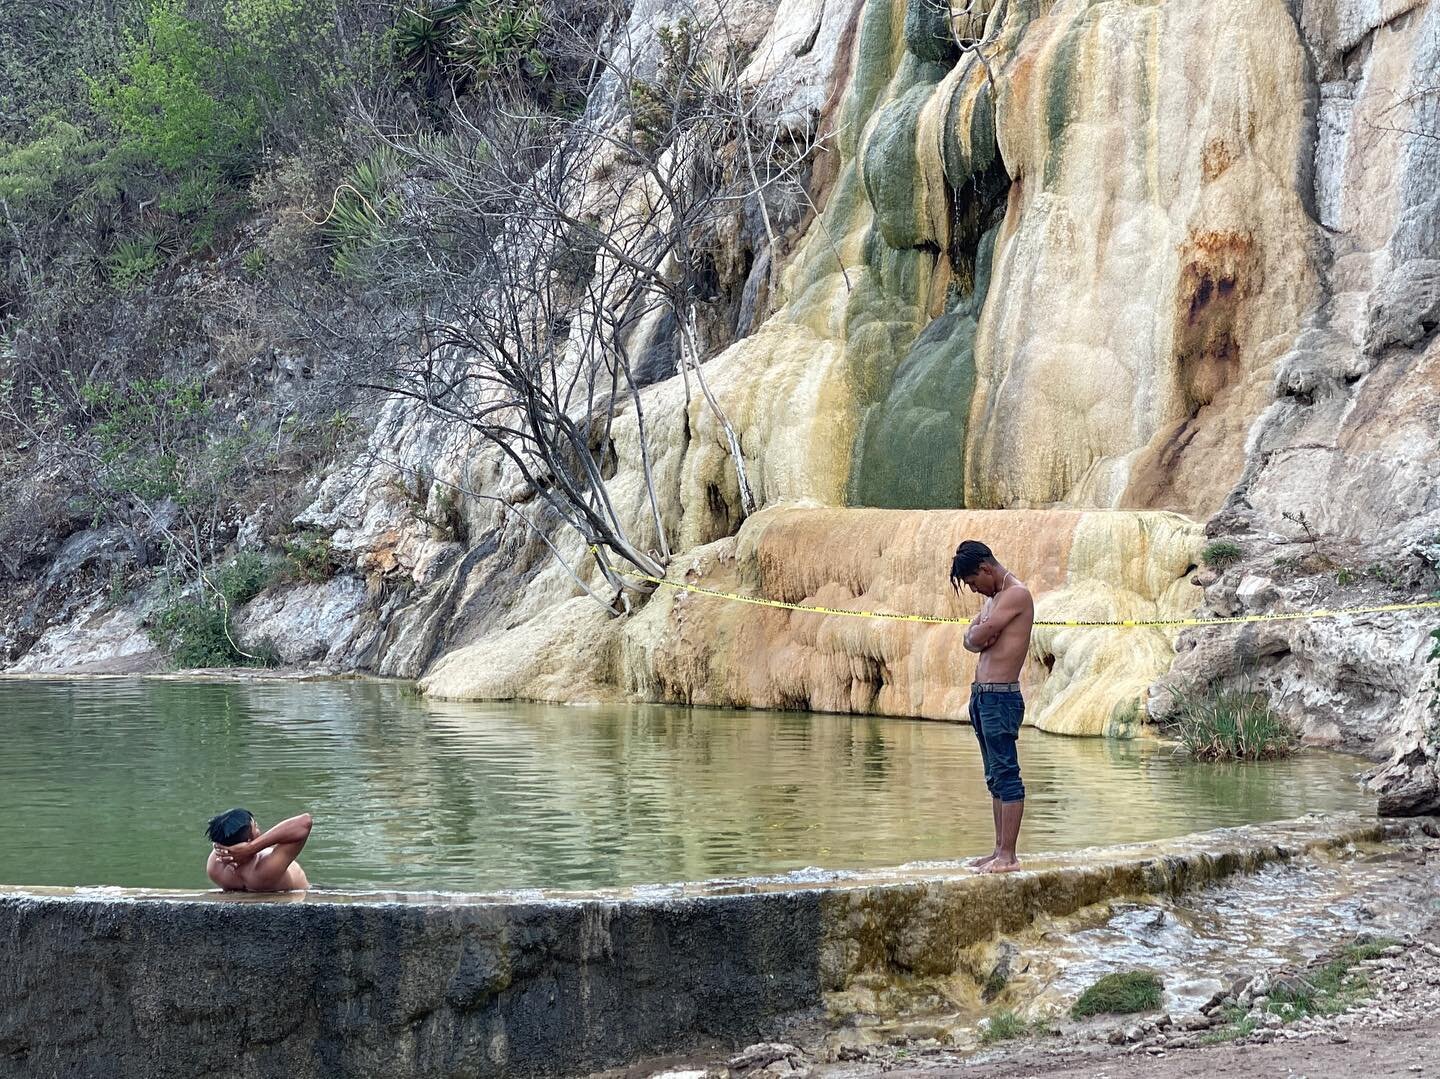 I was initially reluctant about visiting Hierve el Agua, the calcified waterfalls and spring-fed mineral water pools outside of the city of Oaxaca de Ju&aacute;rez. The popular geologic wonder is located in the town of San Isidro Roagu&iacute;a, in t